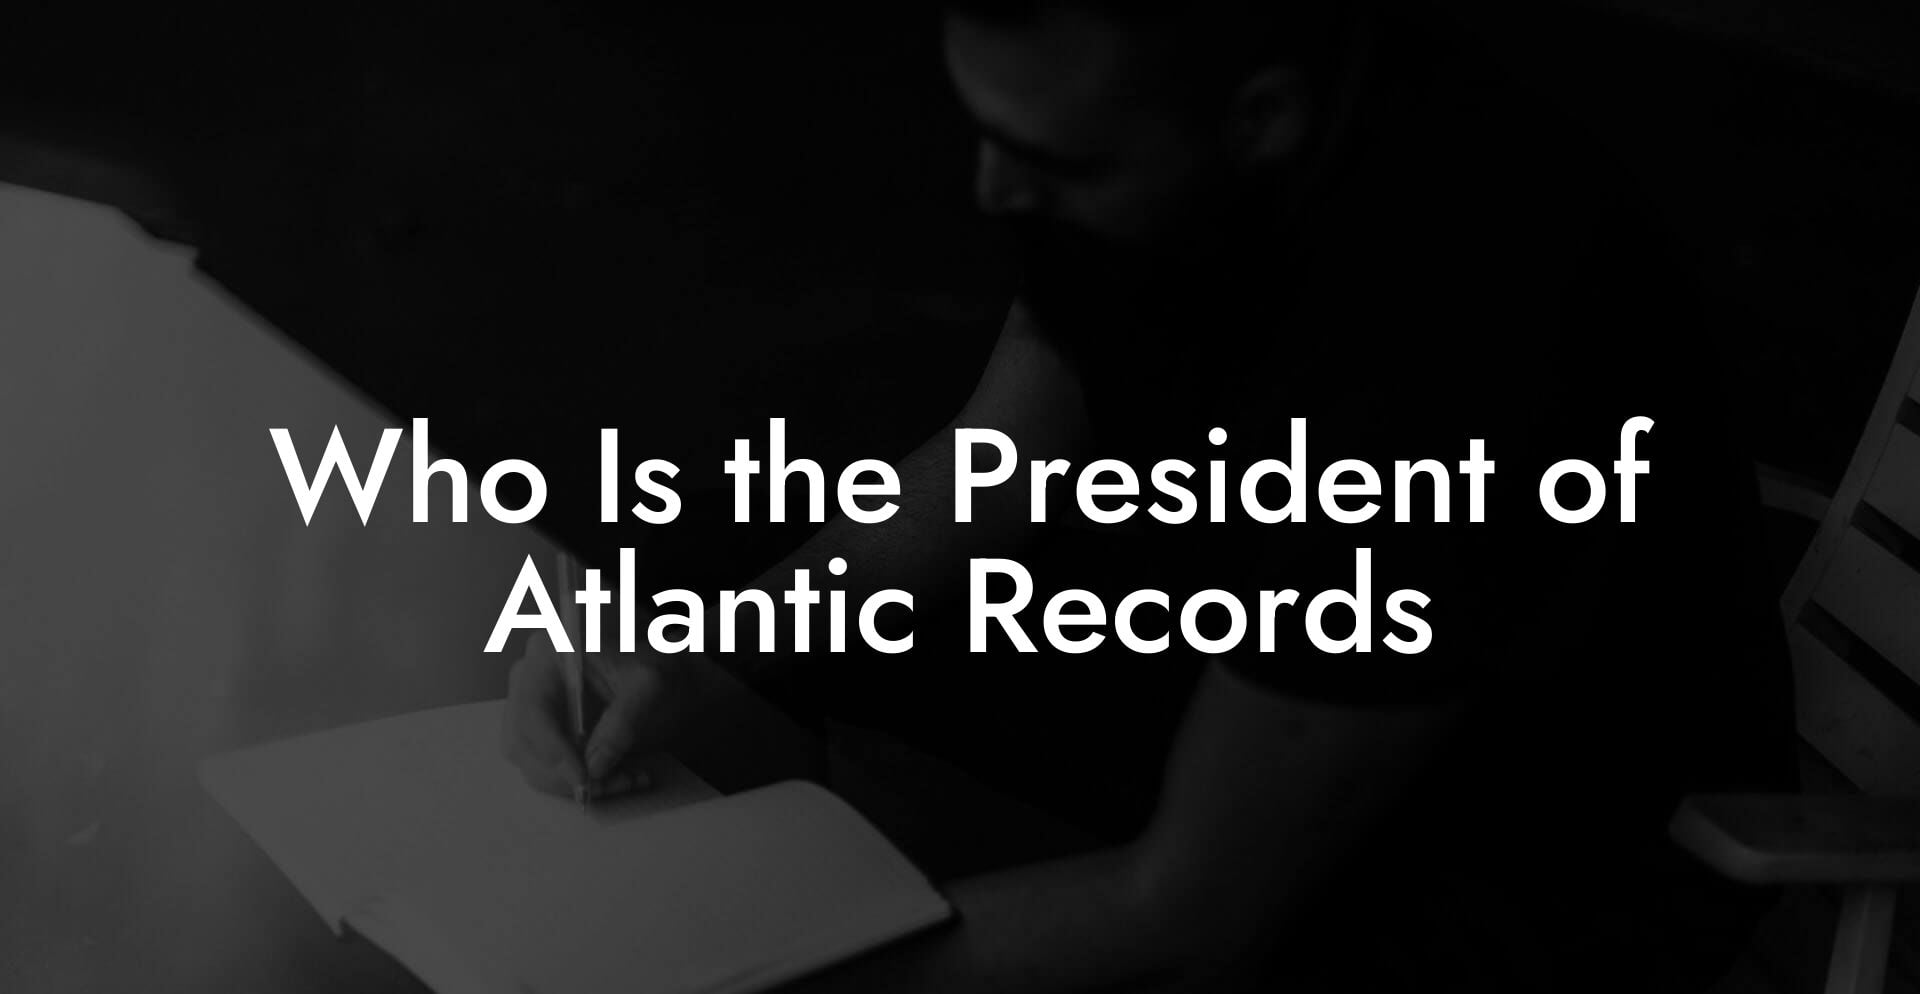 Who Is the President of Atlantic Records